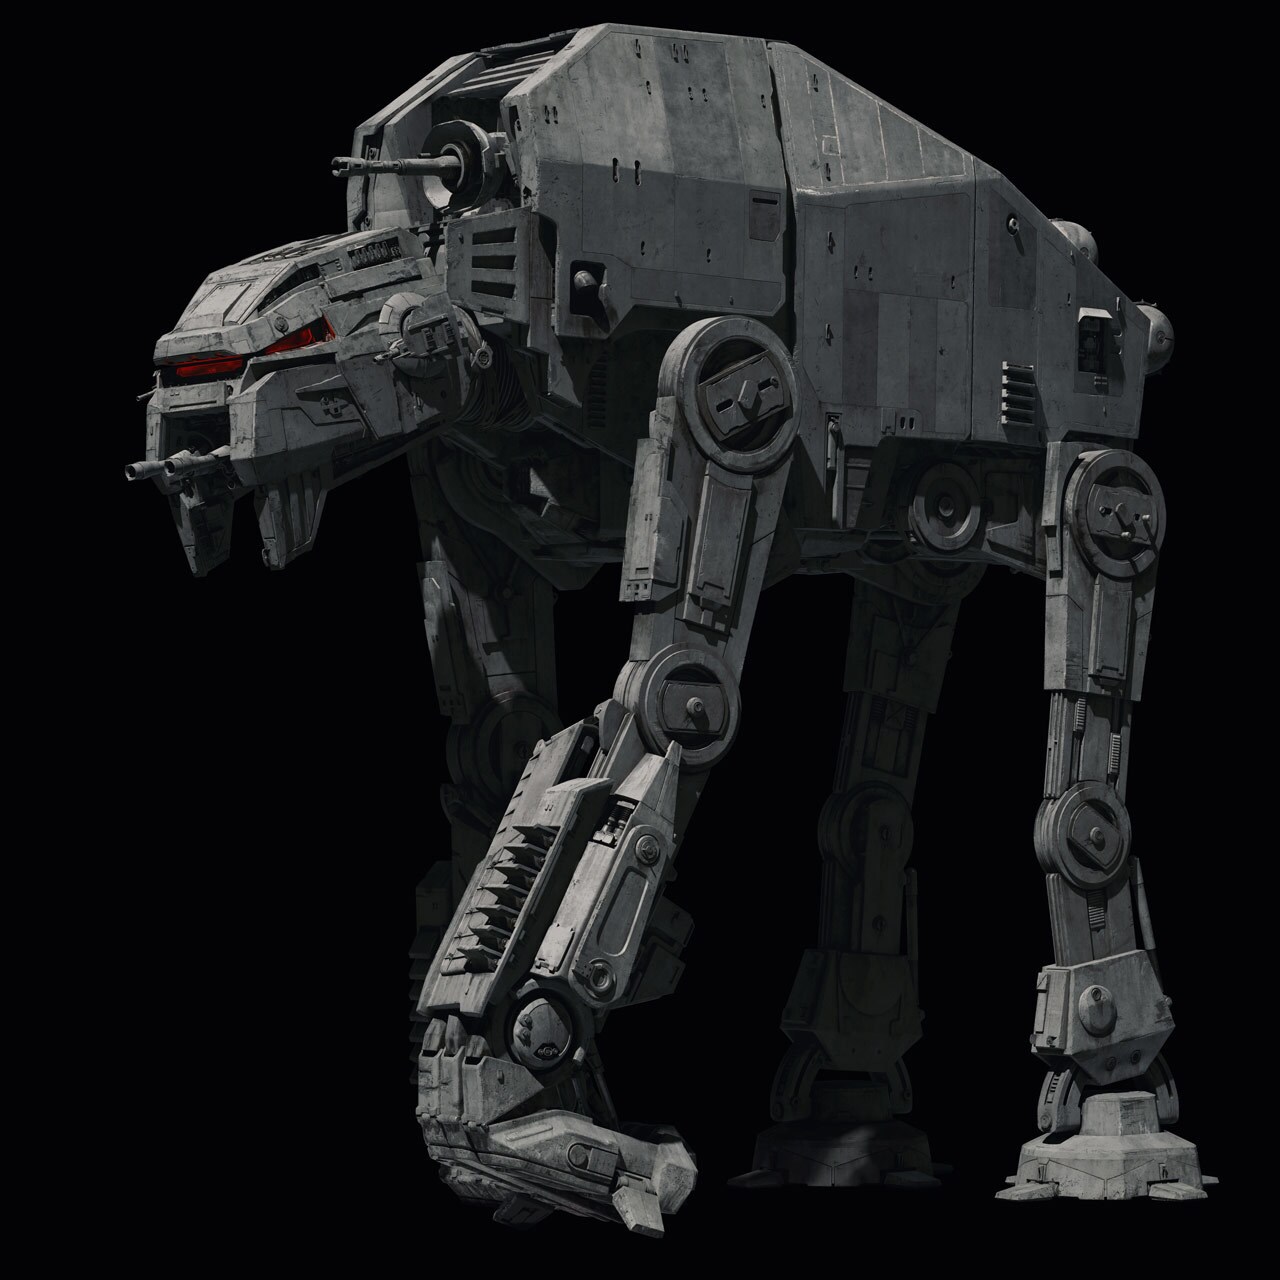 The AT-M6 walker from Star Wars: The Last Jedi.